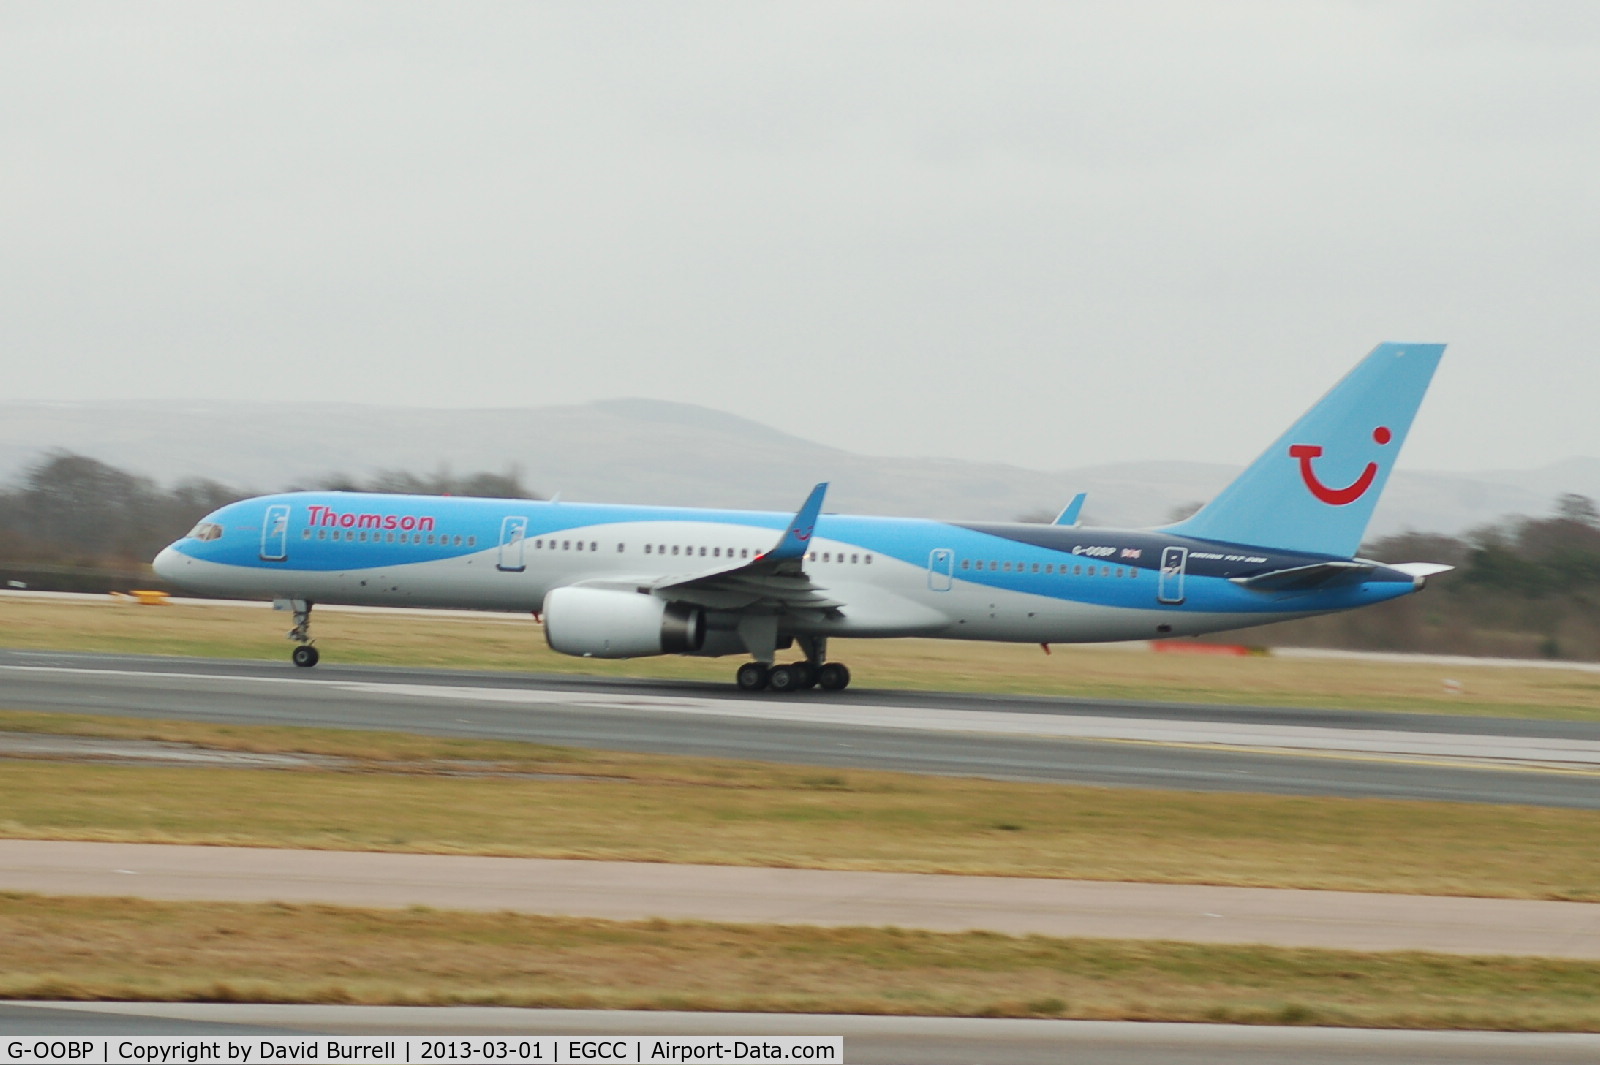 G-OOBP, 2000 Boeing 757-2G5 C/N 30394, Thomson Boeing 757-2G5 taking off from Manchester Airport